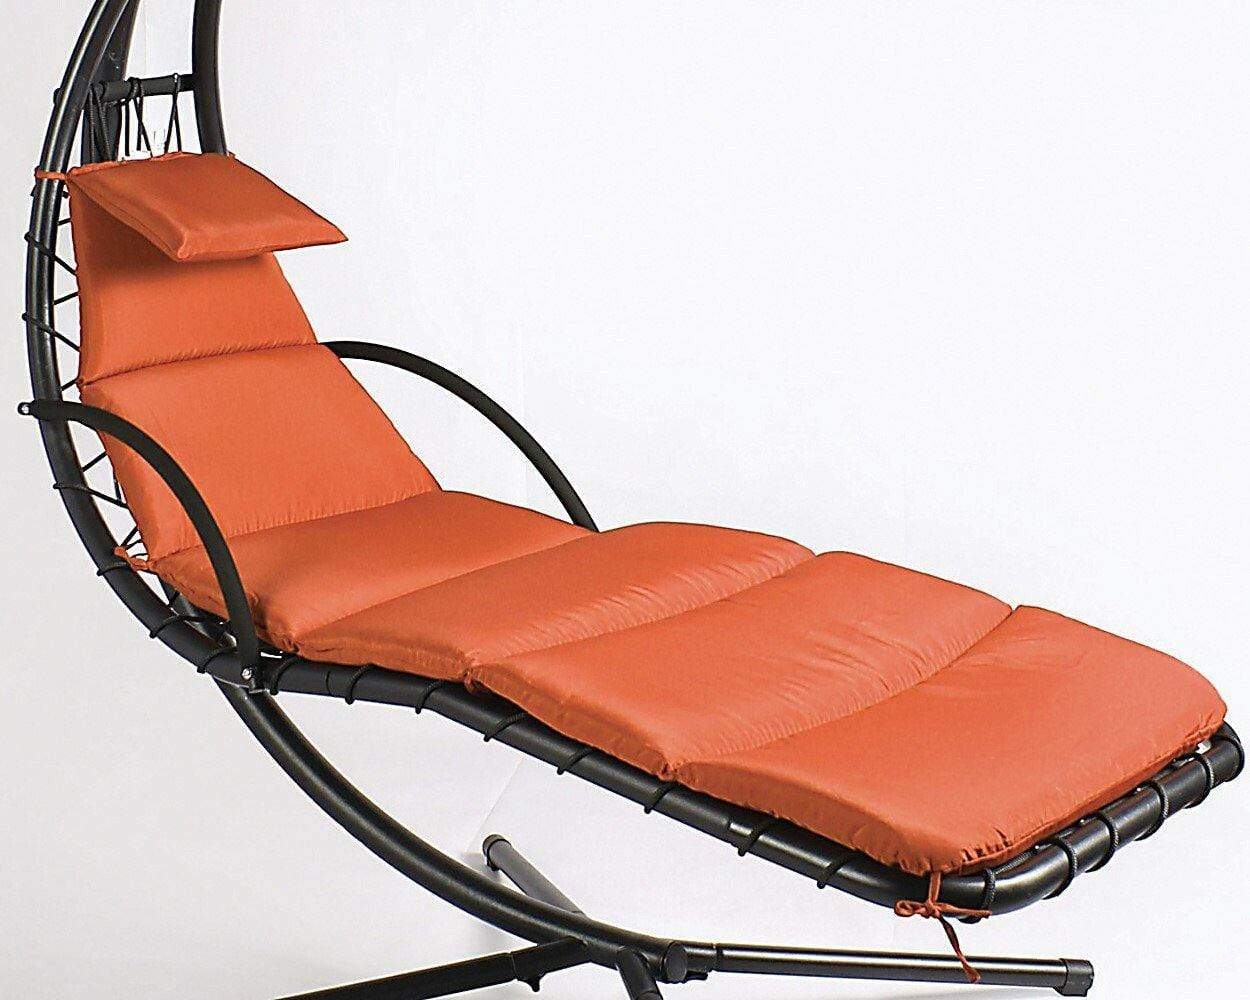 AFD Home Swing Chairs Sky Lounger Terra Cotta